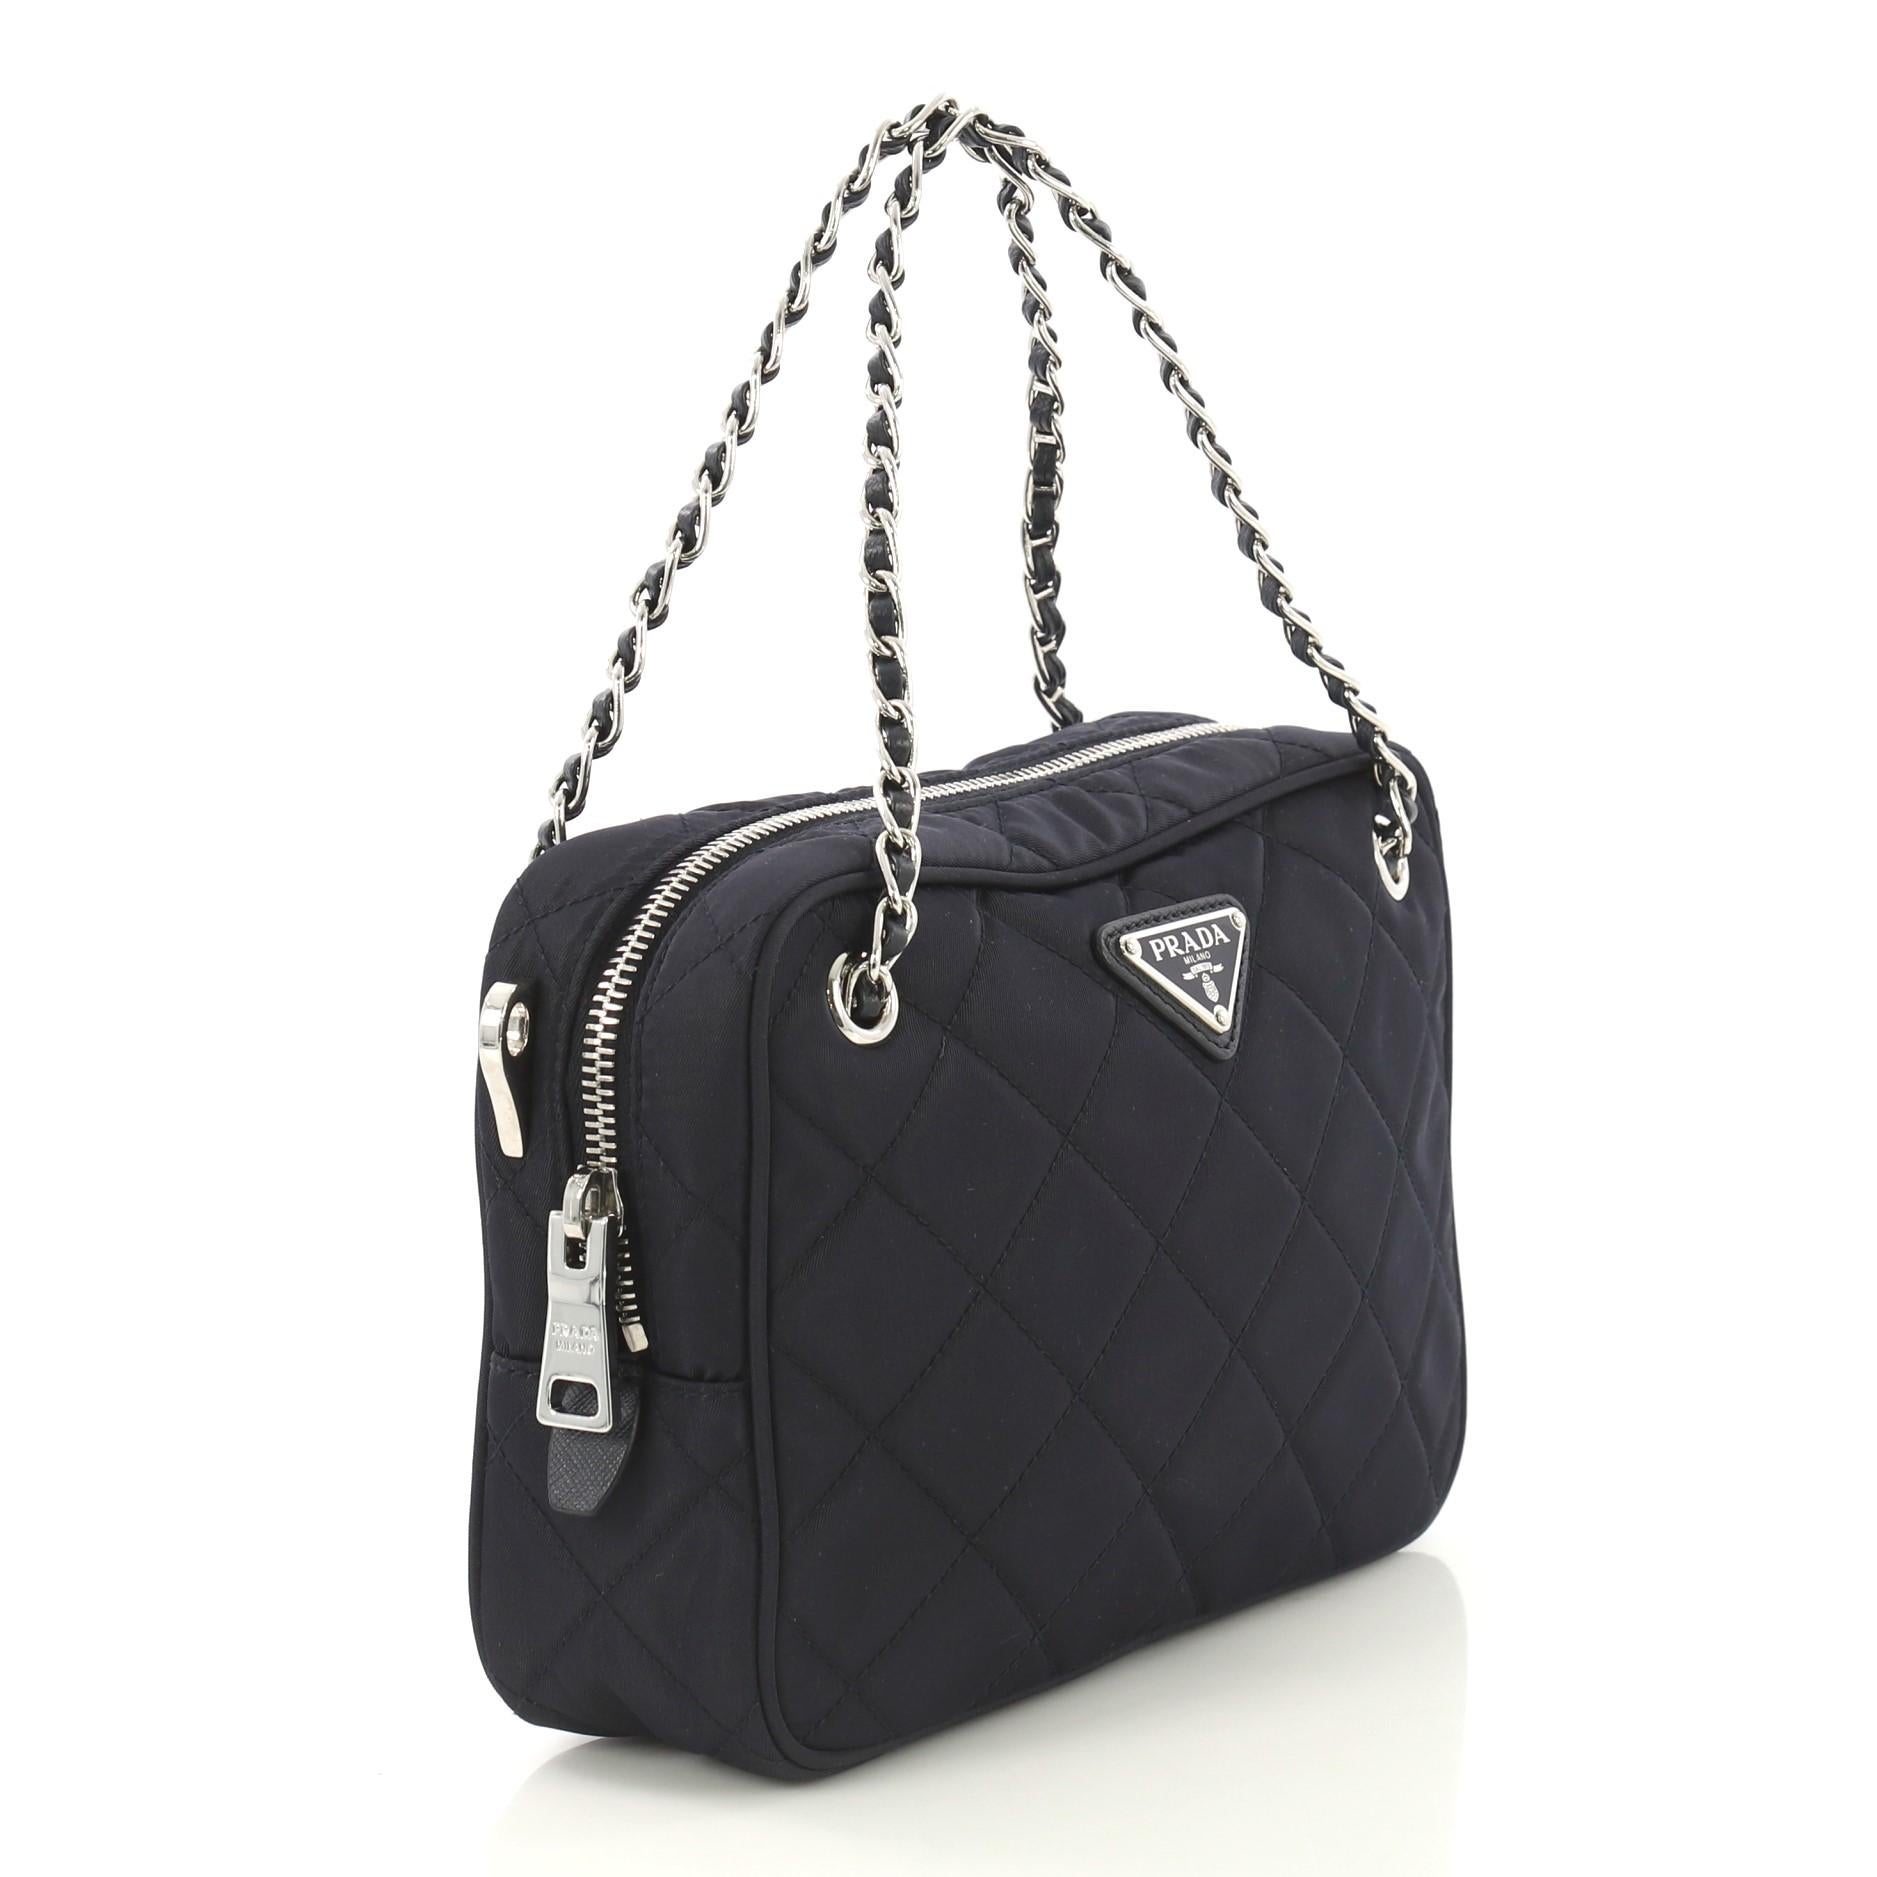 This Prada Convertible Shoulder Bag Quilted Tessuto Medium, crafted in navy quilted tessuto, features woven-in leather chain straps and silver-tone hardware. Its zip closure opens to a navy fabric interior with zip and slip pockets. 

Condition: